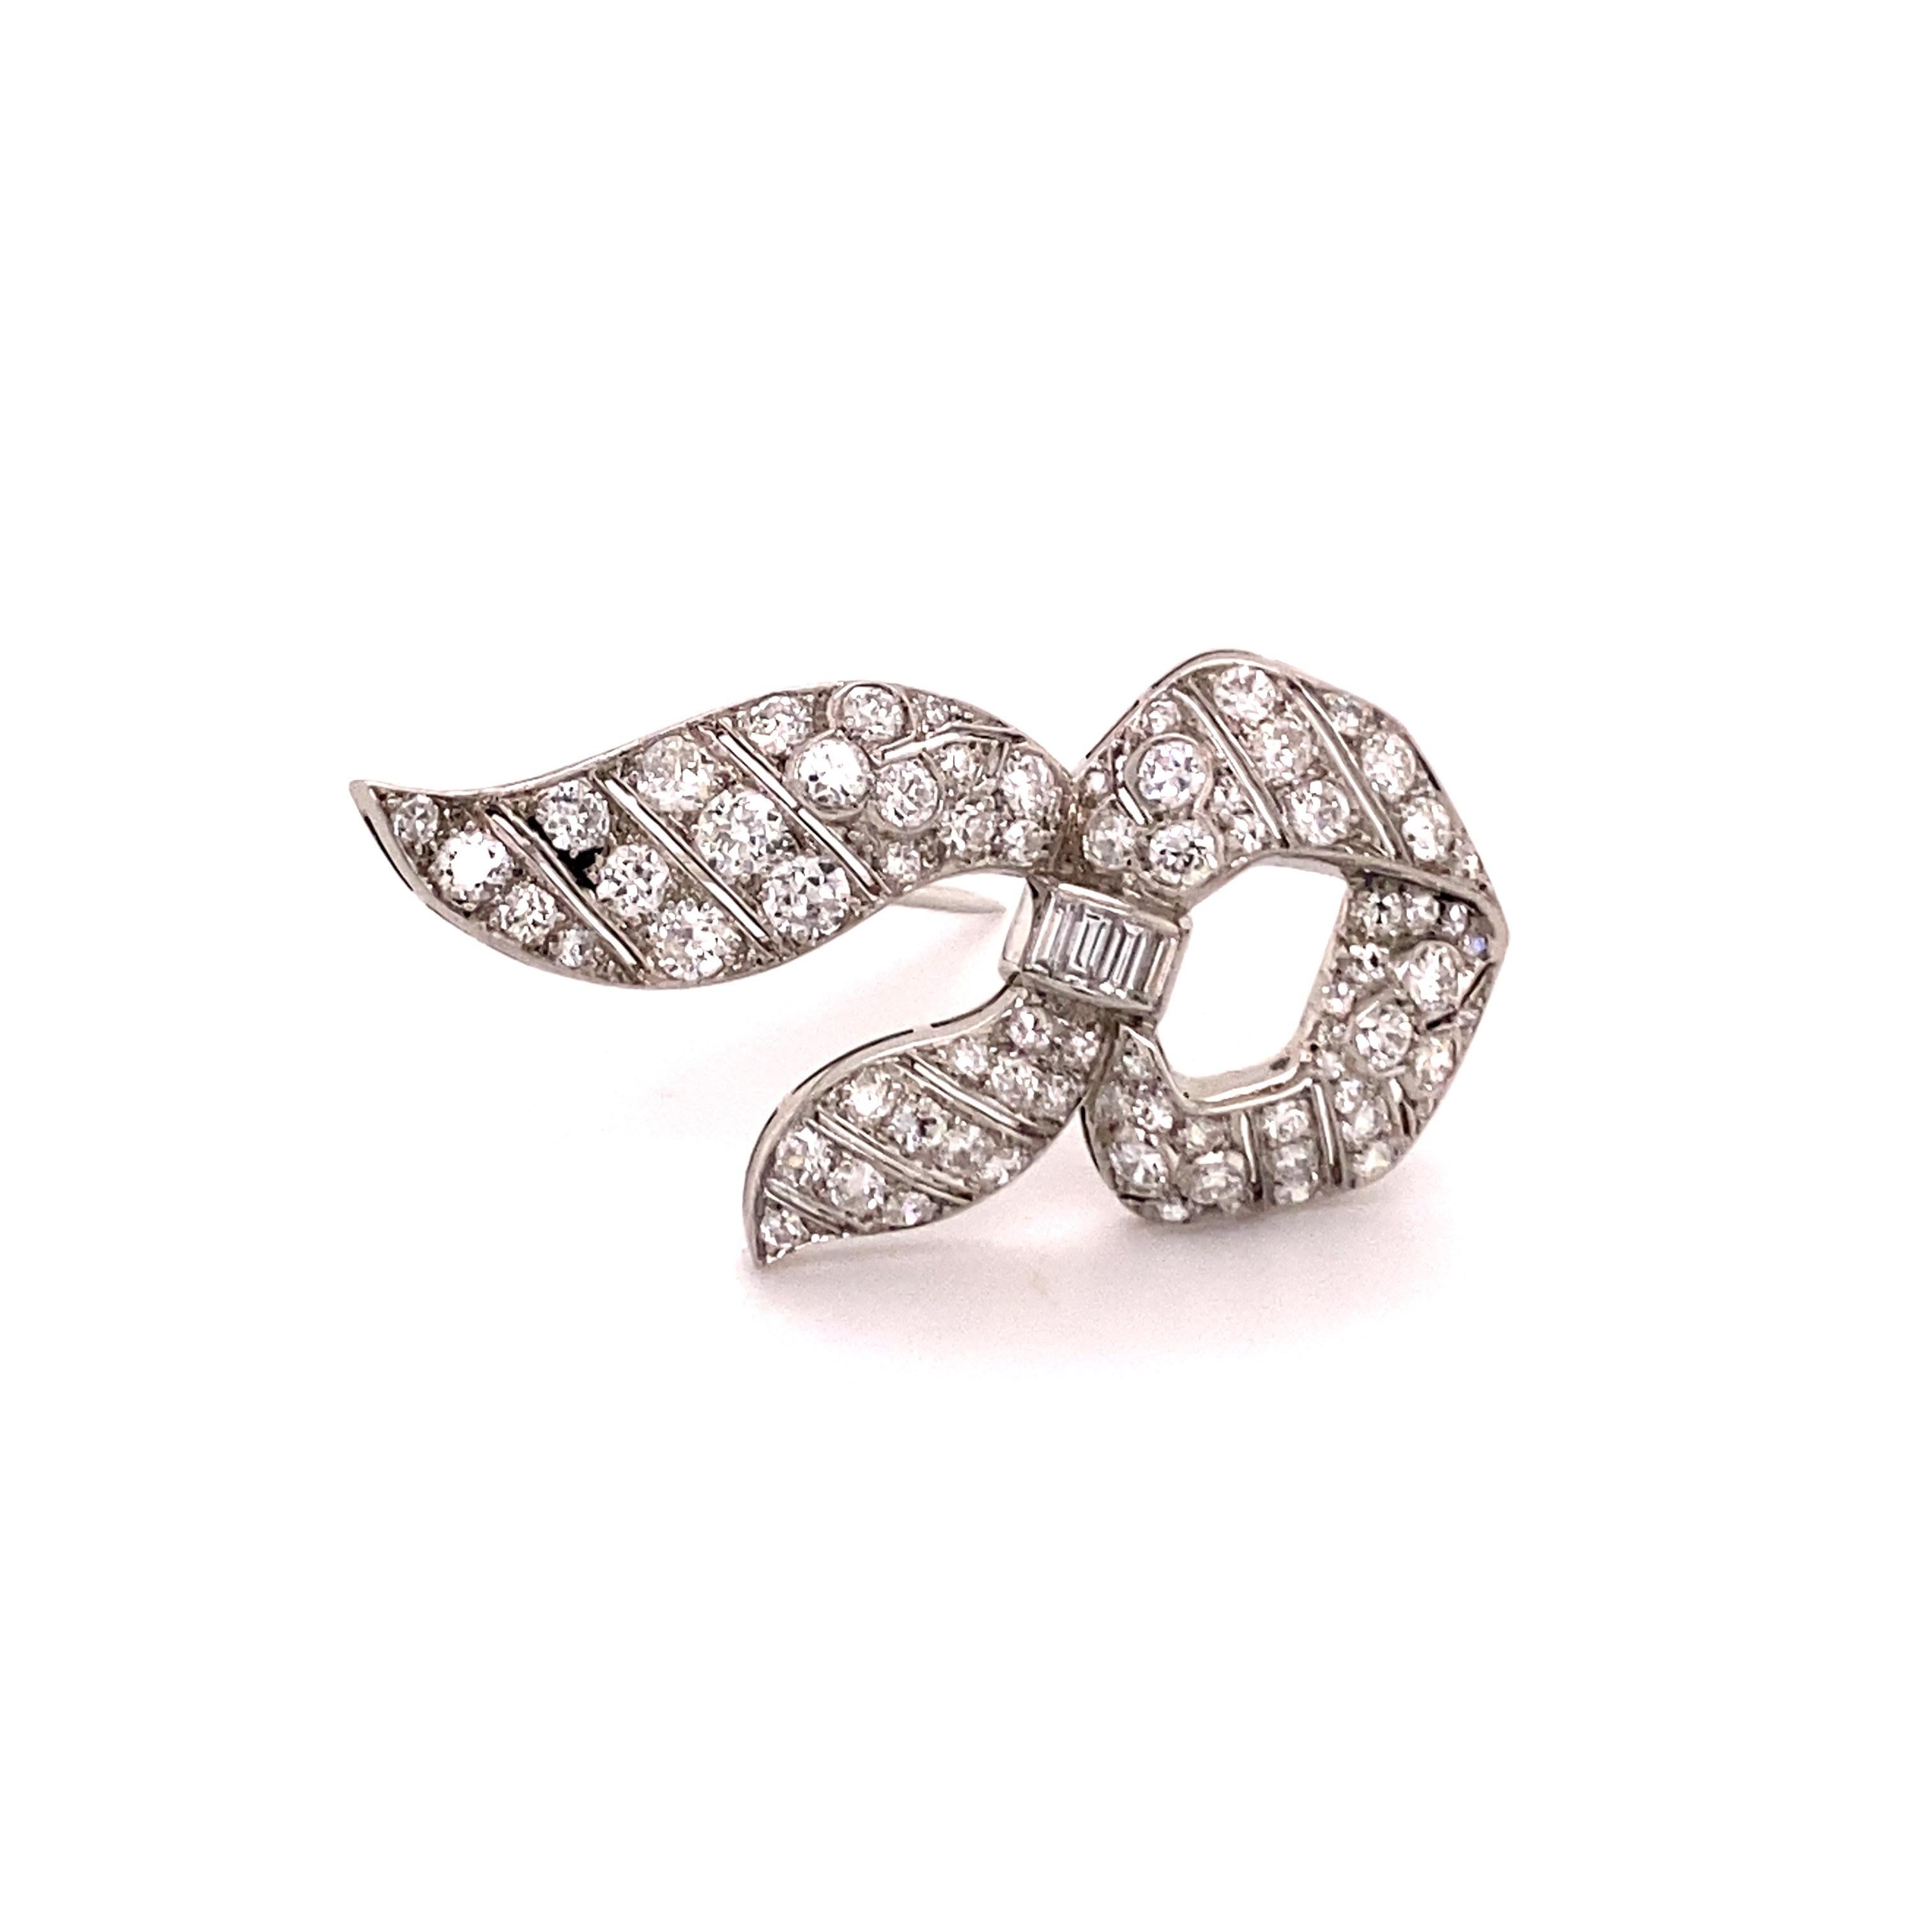 This beautiful brooch from the 1950s features approximate 2.10 carats of round brilliant- and baguette-cut diamonds set in a ribbon design. 

À jour worked - made in platinum. A very charming piece.

Dimensions: 42 x 20 mm / 1.65 x 0.79 inches
Assay